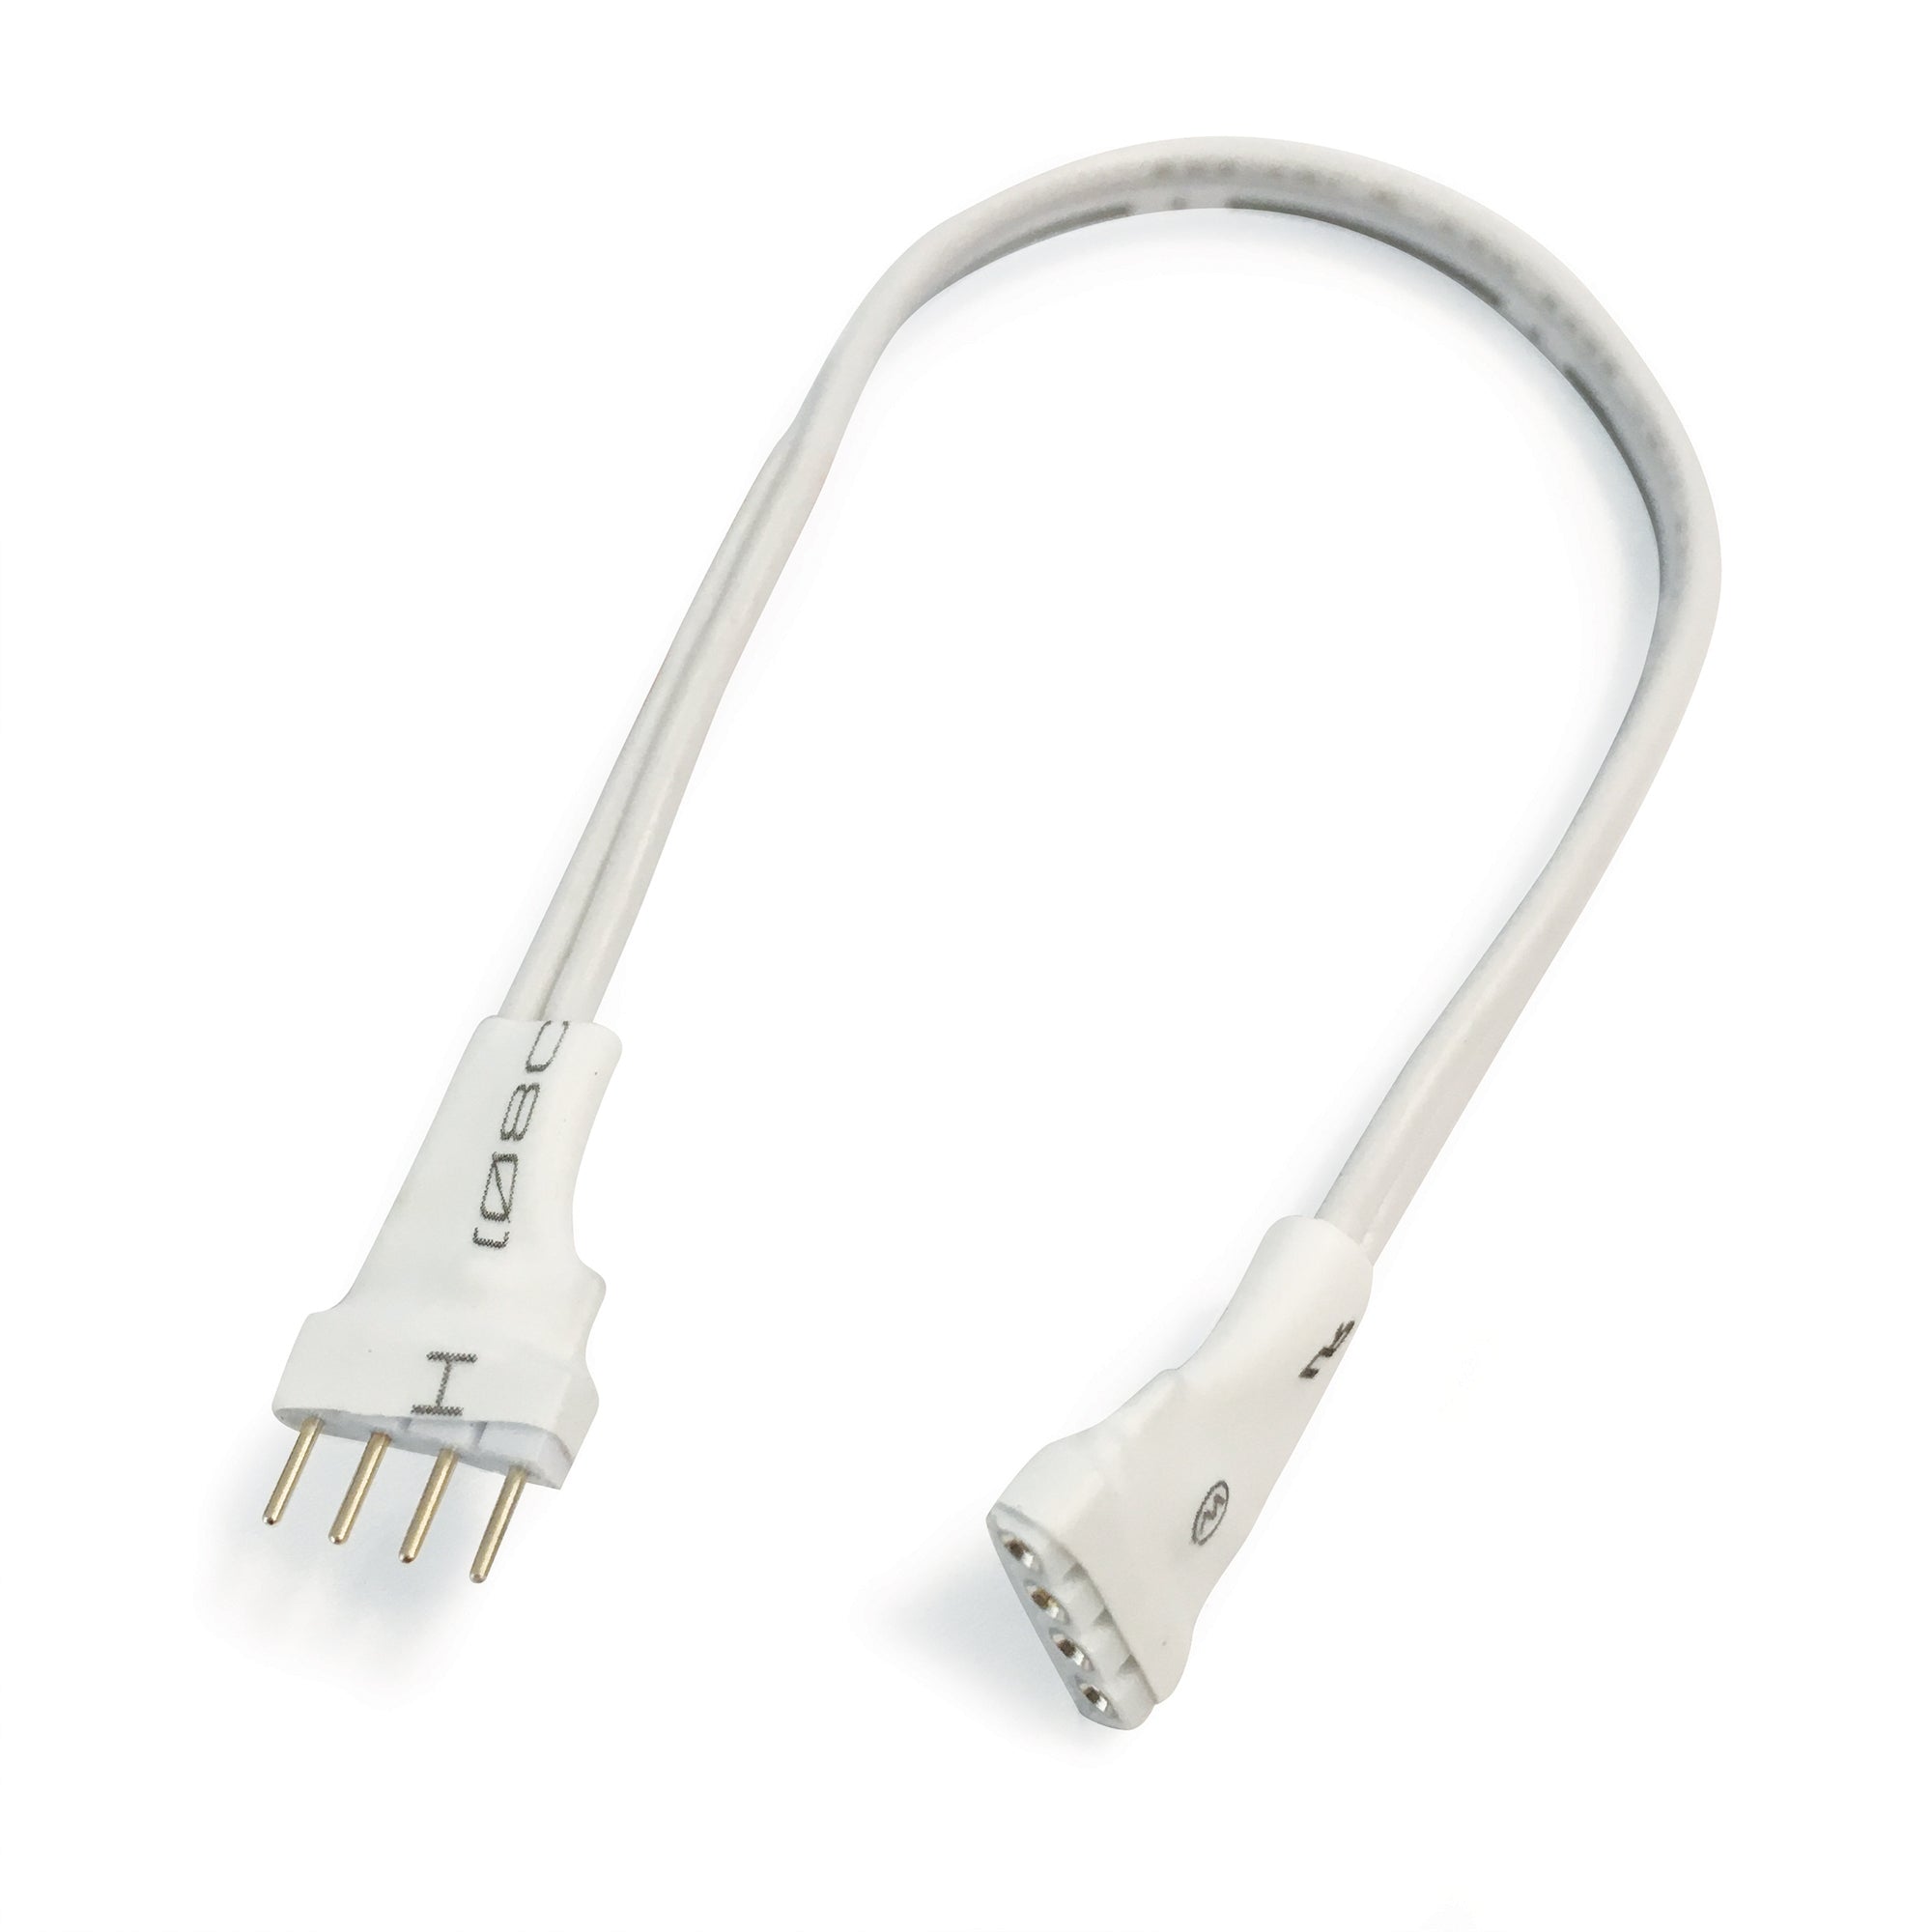 Nora Lighting NARGBW-972W 72" Interconnection Cable For RGBW Tape Light - White